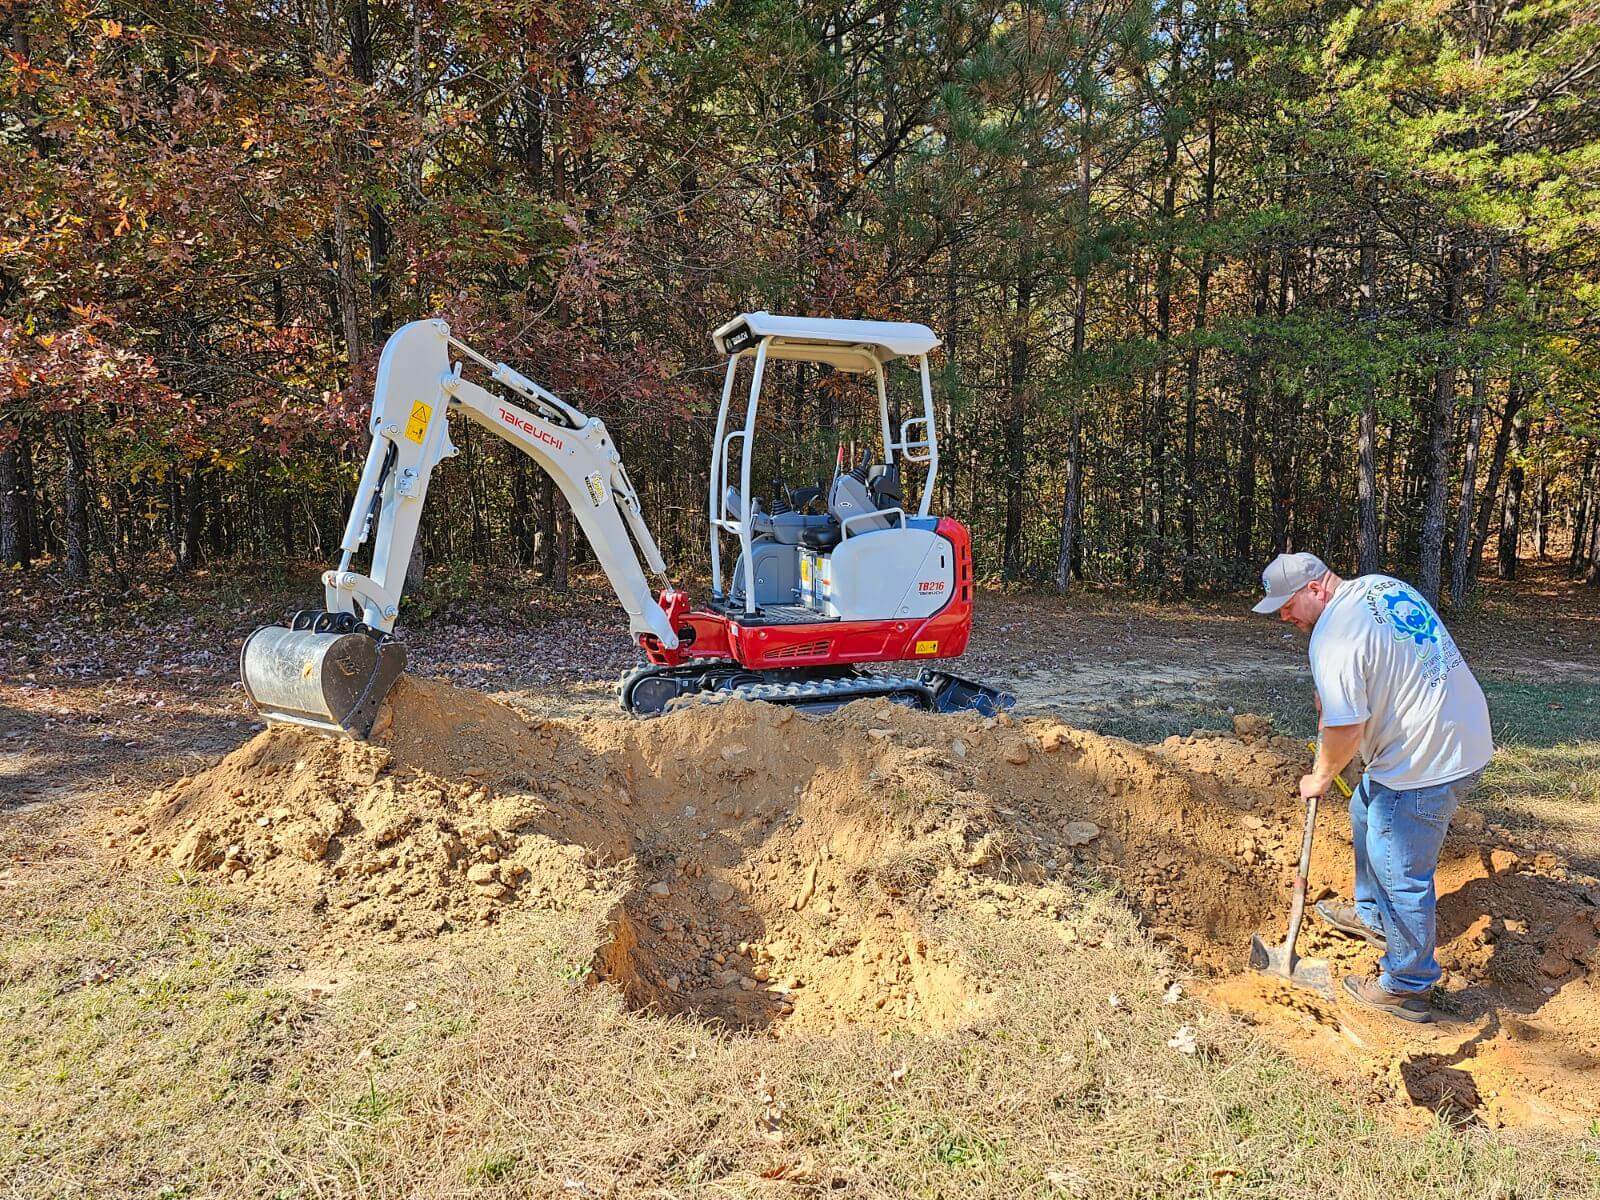 A man is digging a hole with an excavator.